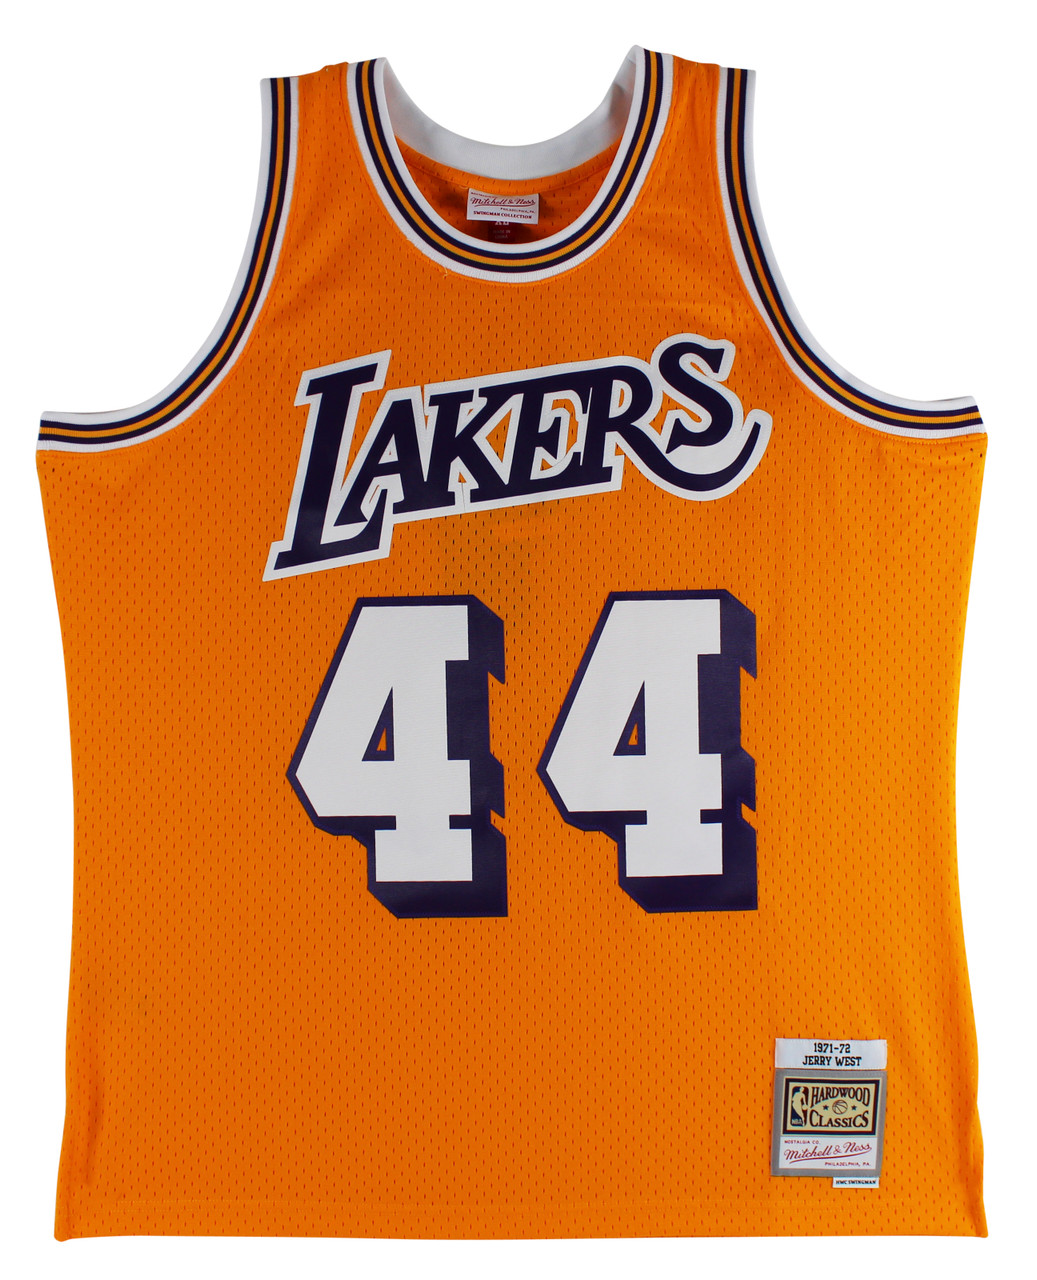 Press Pass Collectibles Lakers Jerry West 3X Inscribed Signed Yellow M&N HWC Swingman Jersey BAS